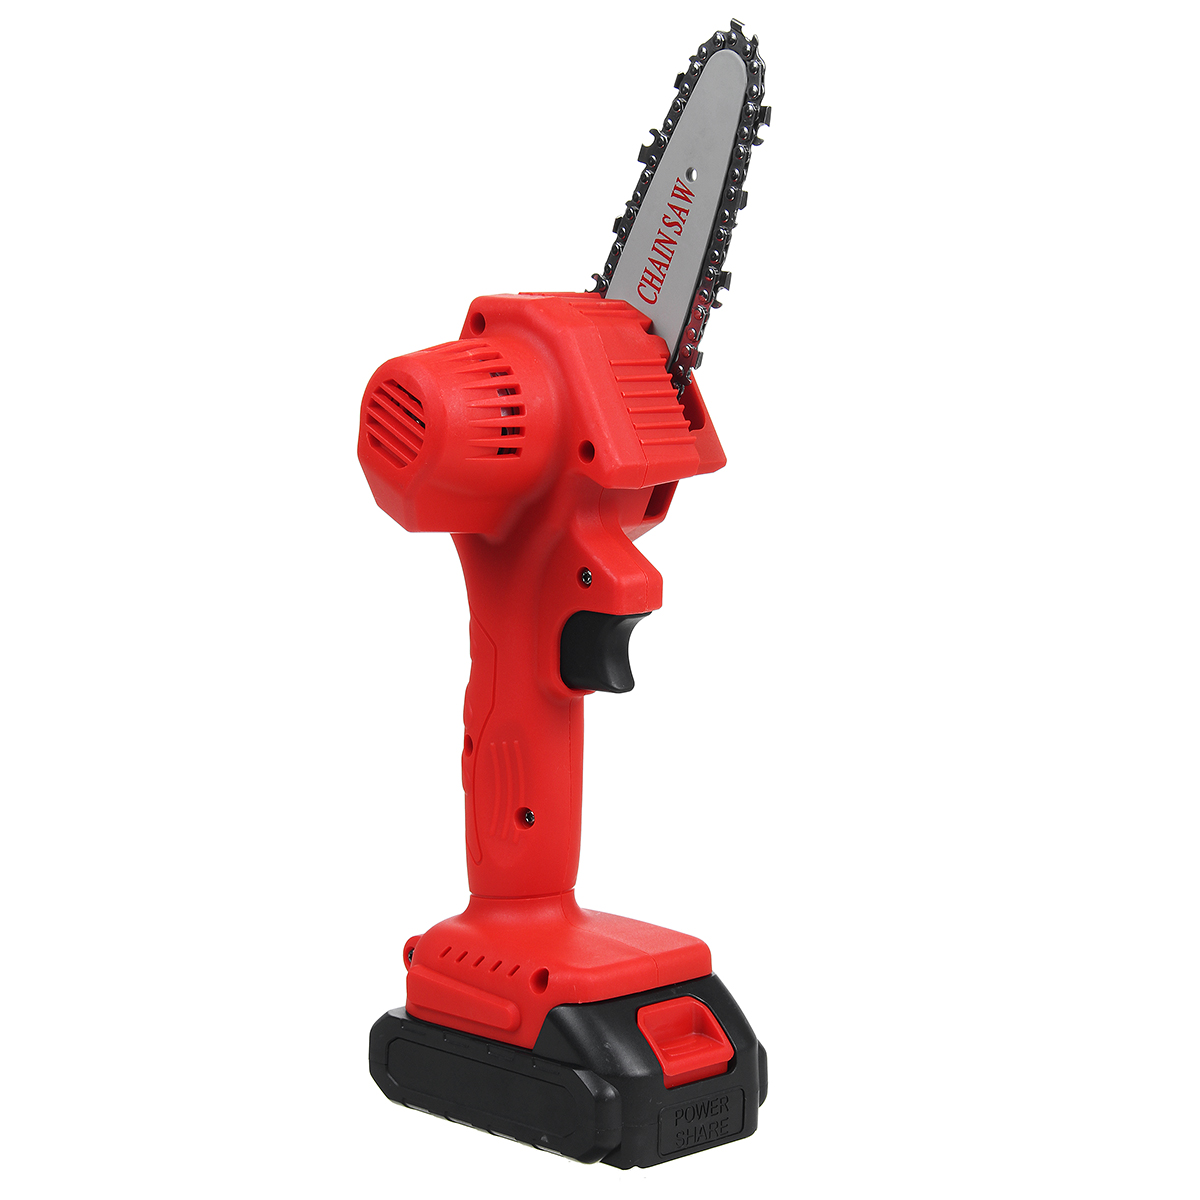 26V-4inch-Rechargeable-Portable-Saw-Woodworking-Electric-Saws-High-Carbon-Steel-1782284-5